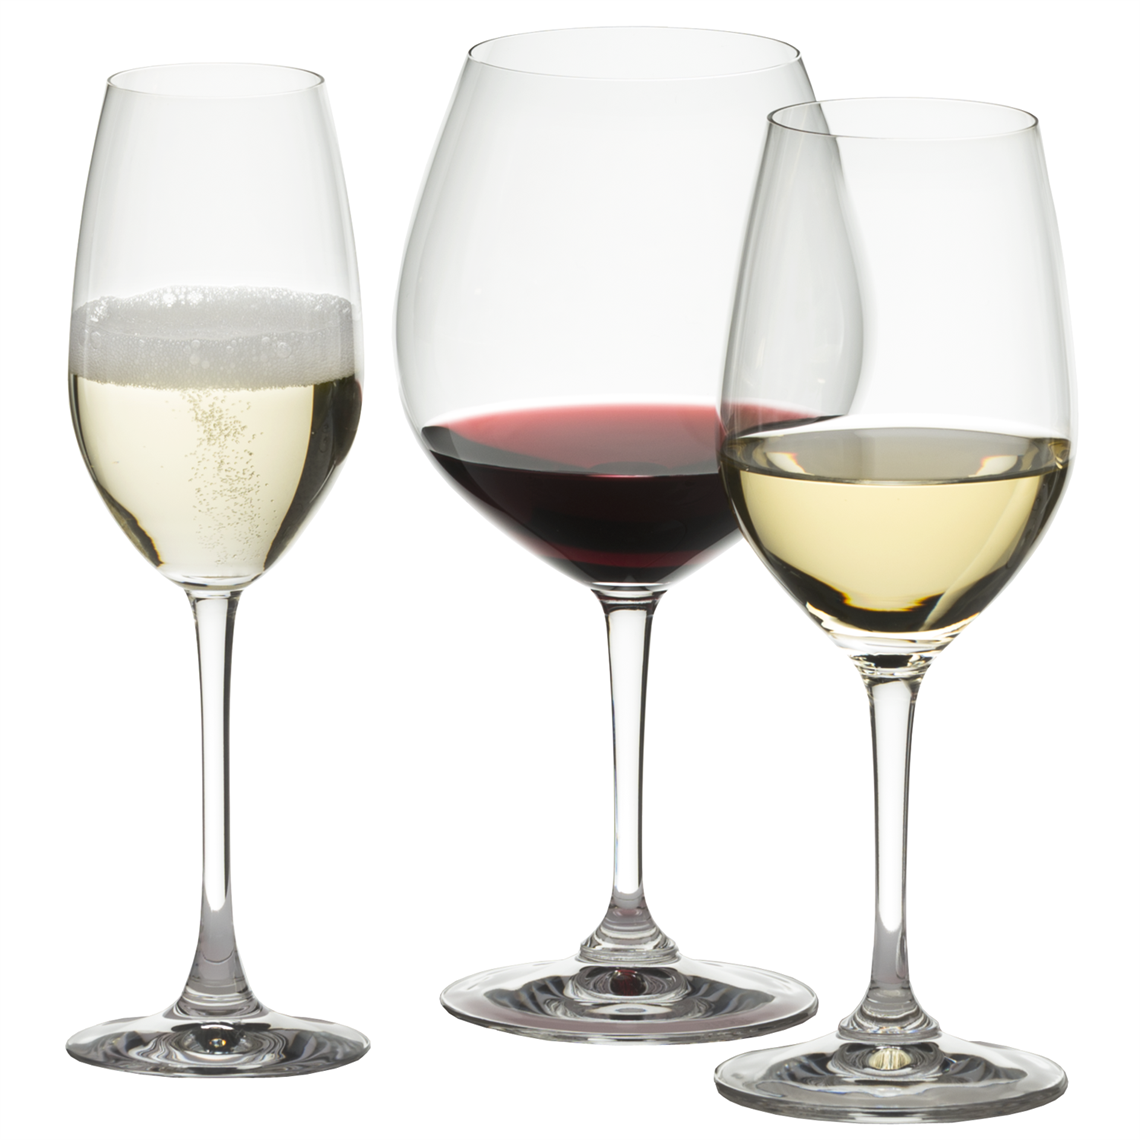 View more stolzle from our Restaurant & Trade Glasses range